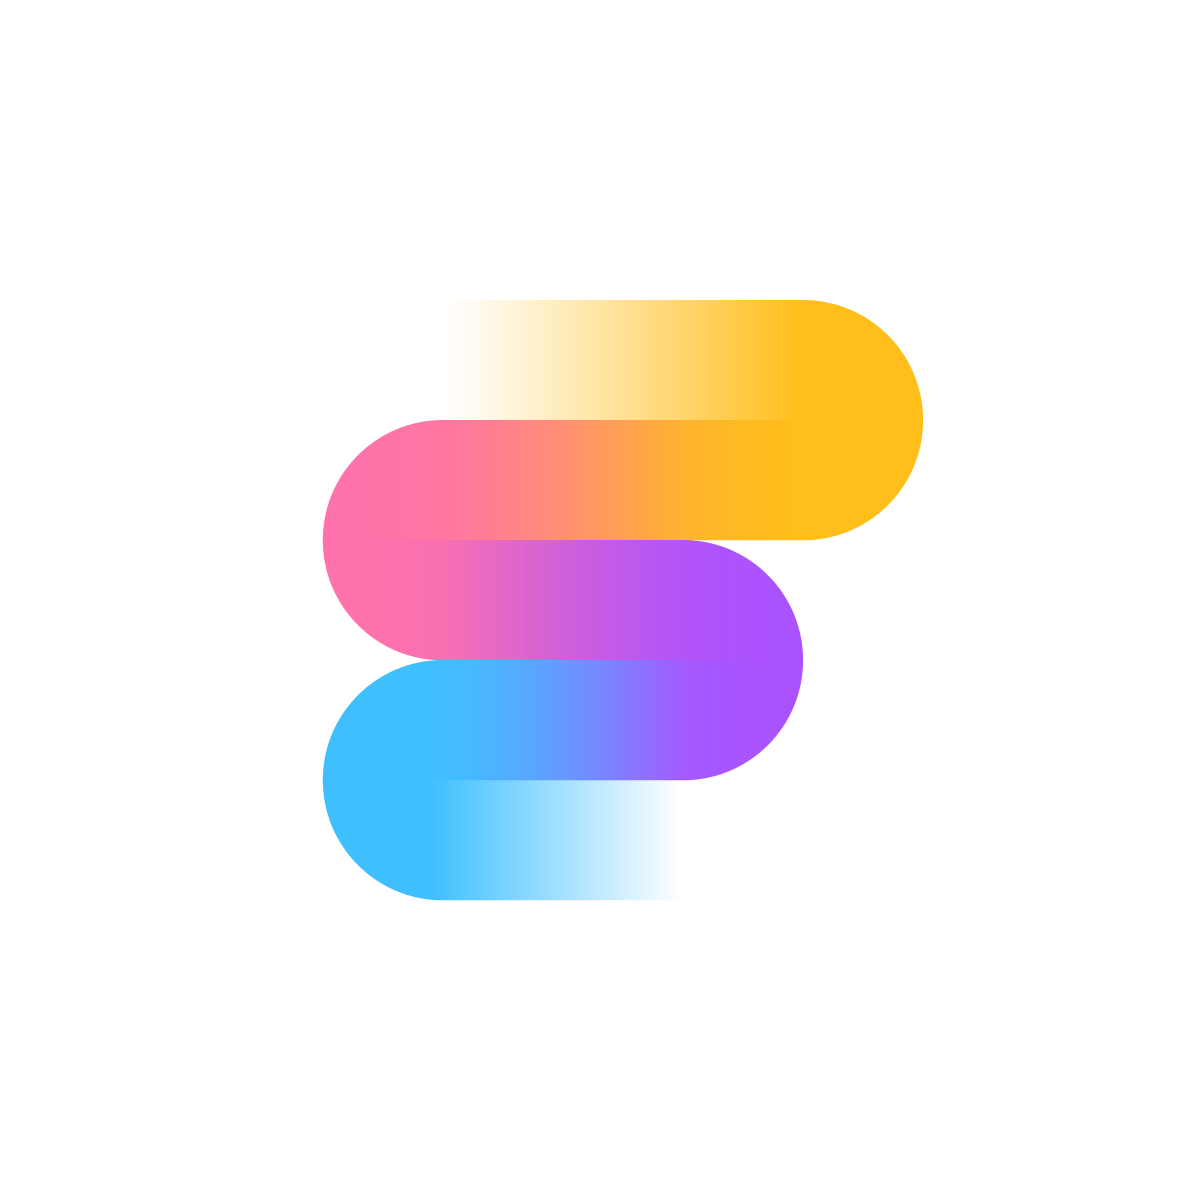 Flow F Logo: A single colorful line forming the abstract shape of the letter F